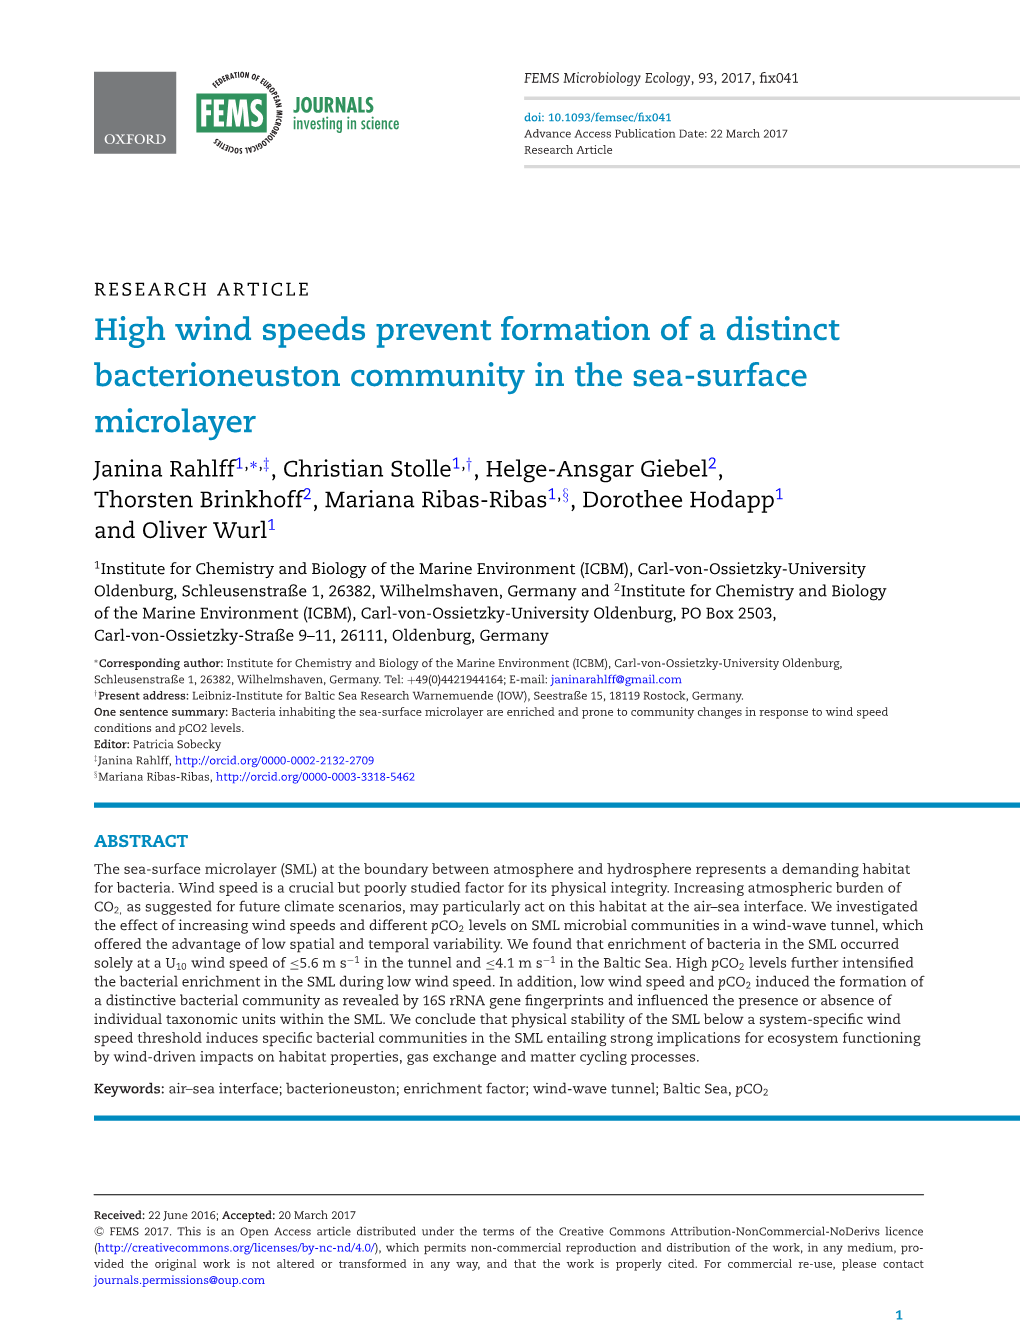 High Wind Speeds Prevent Formation of a Distinct Bacterioneuston